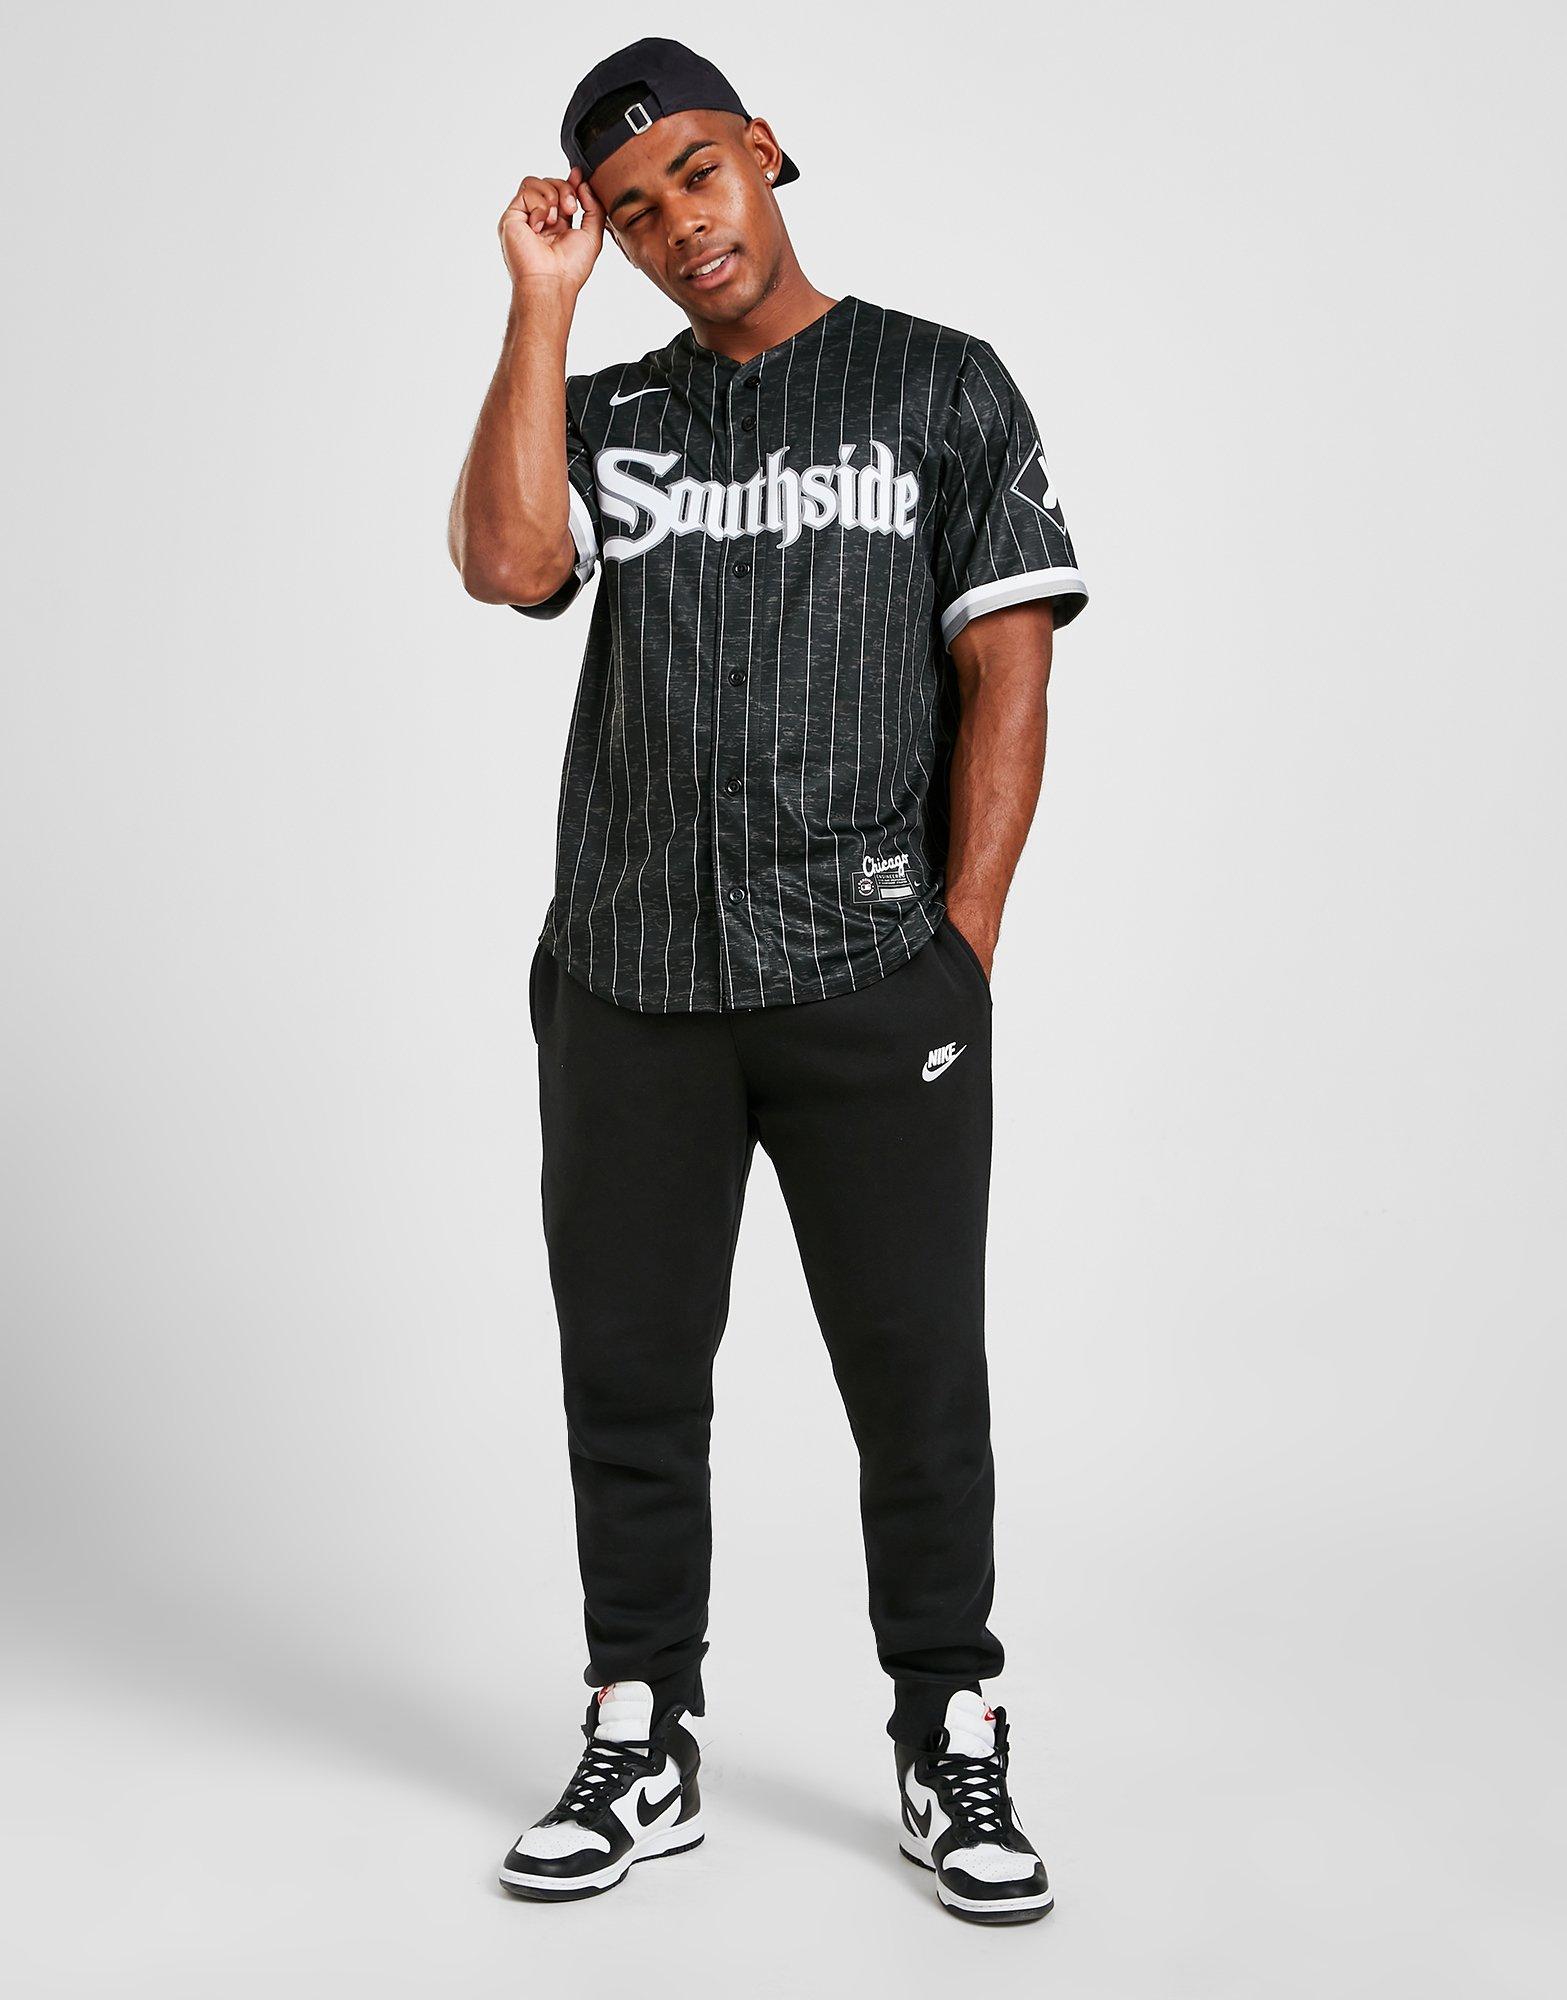 Chicago White Sox City Connect Southside Replica Jersey by Nike |  Grandstand Ltd.